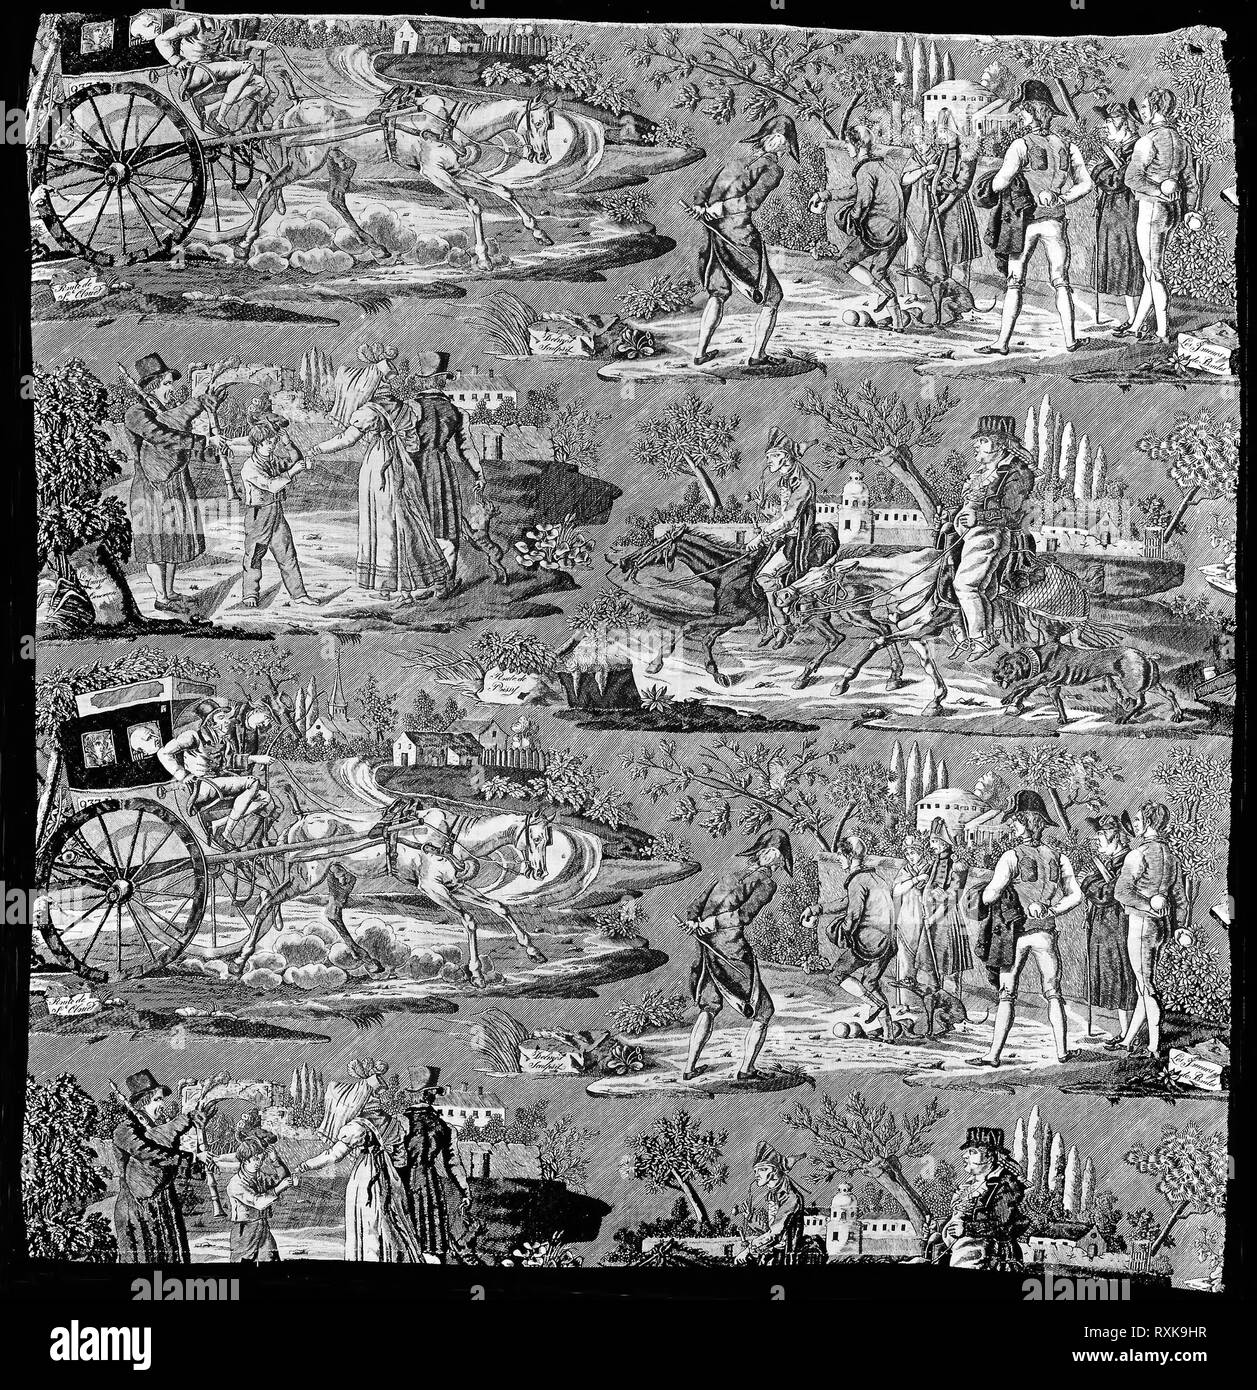 La Route de St. Cloud ou de Poissy (Furnishing Fabric). Designed by Carle Vernet (French, 1758-1836) and Delmès (French, founded 1815) engraved by Philibert Louis Debucourt (French, 1755-1831) after Carle Vernet (French 1758-1836); Manufactured by Favre Petitpierre et Cie. (French, 1802-1818); France, Nantes. Date: 1822-1830. Dimensions: 85.1 x 80.5 cm (33 1/2 x 31 5/8 in.)  Warp repeat: 46.9 cm (18 1/2 in.). Cotton, plain weave; engraved roller printed. Origin: Nantes. Museum: The Chicago Art Institute. Stock Photo